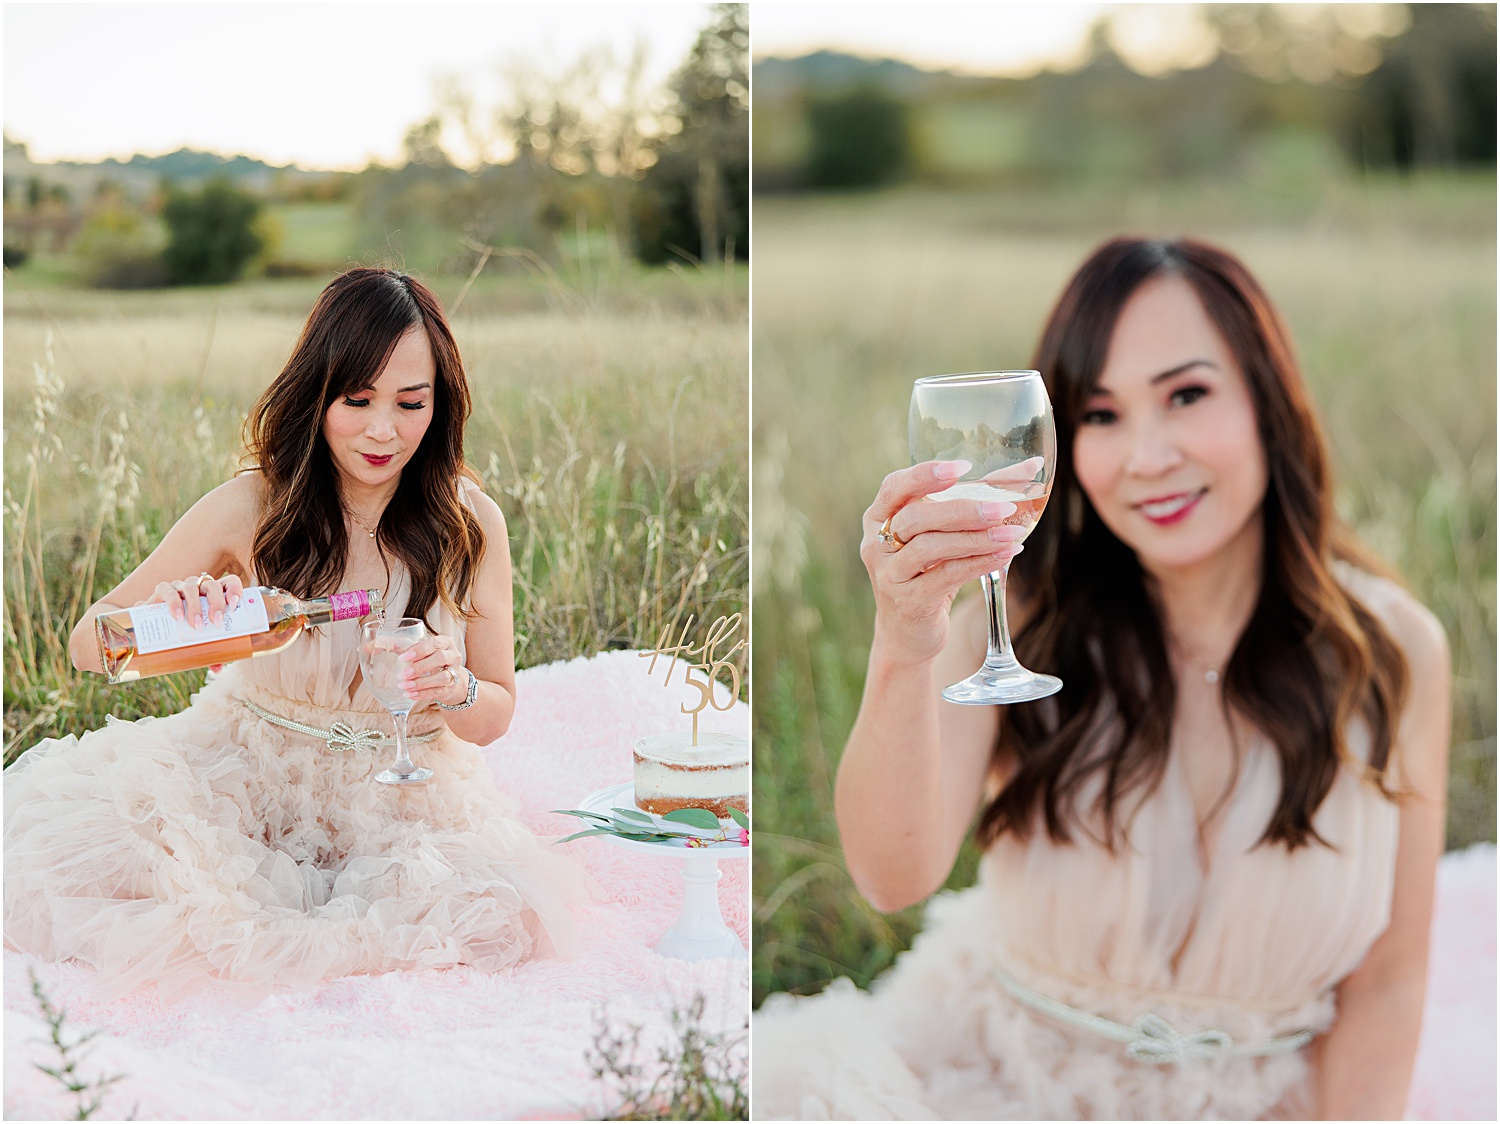 50th Birthday Photo Session - woman wearing tulle dress pouring wine